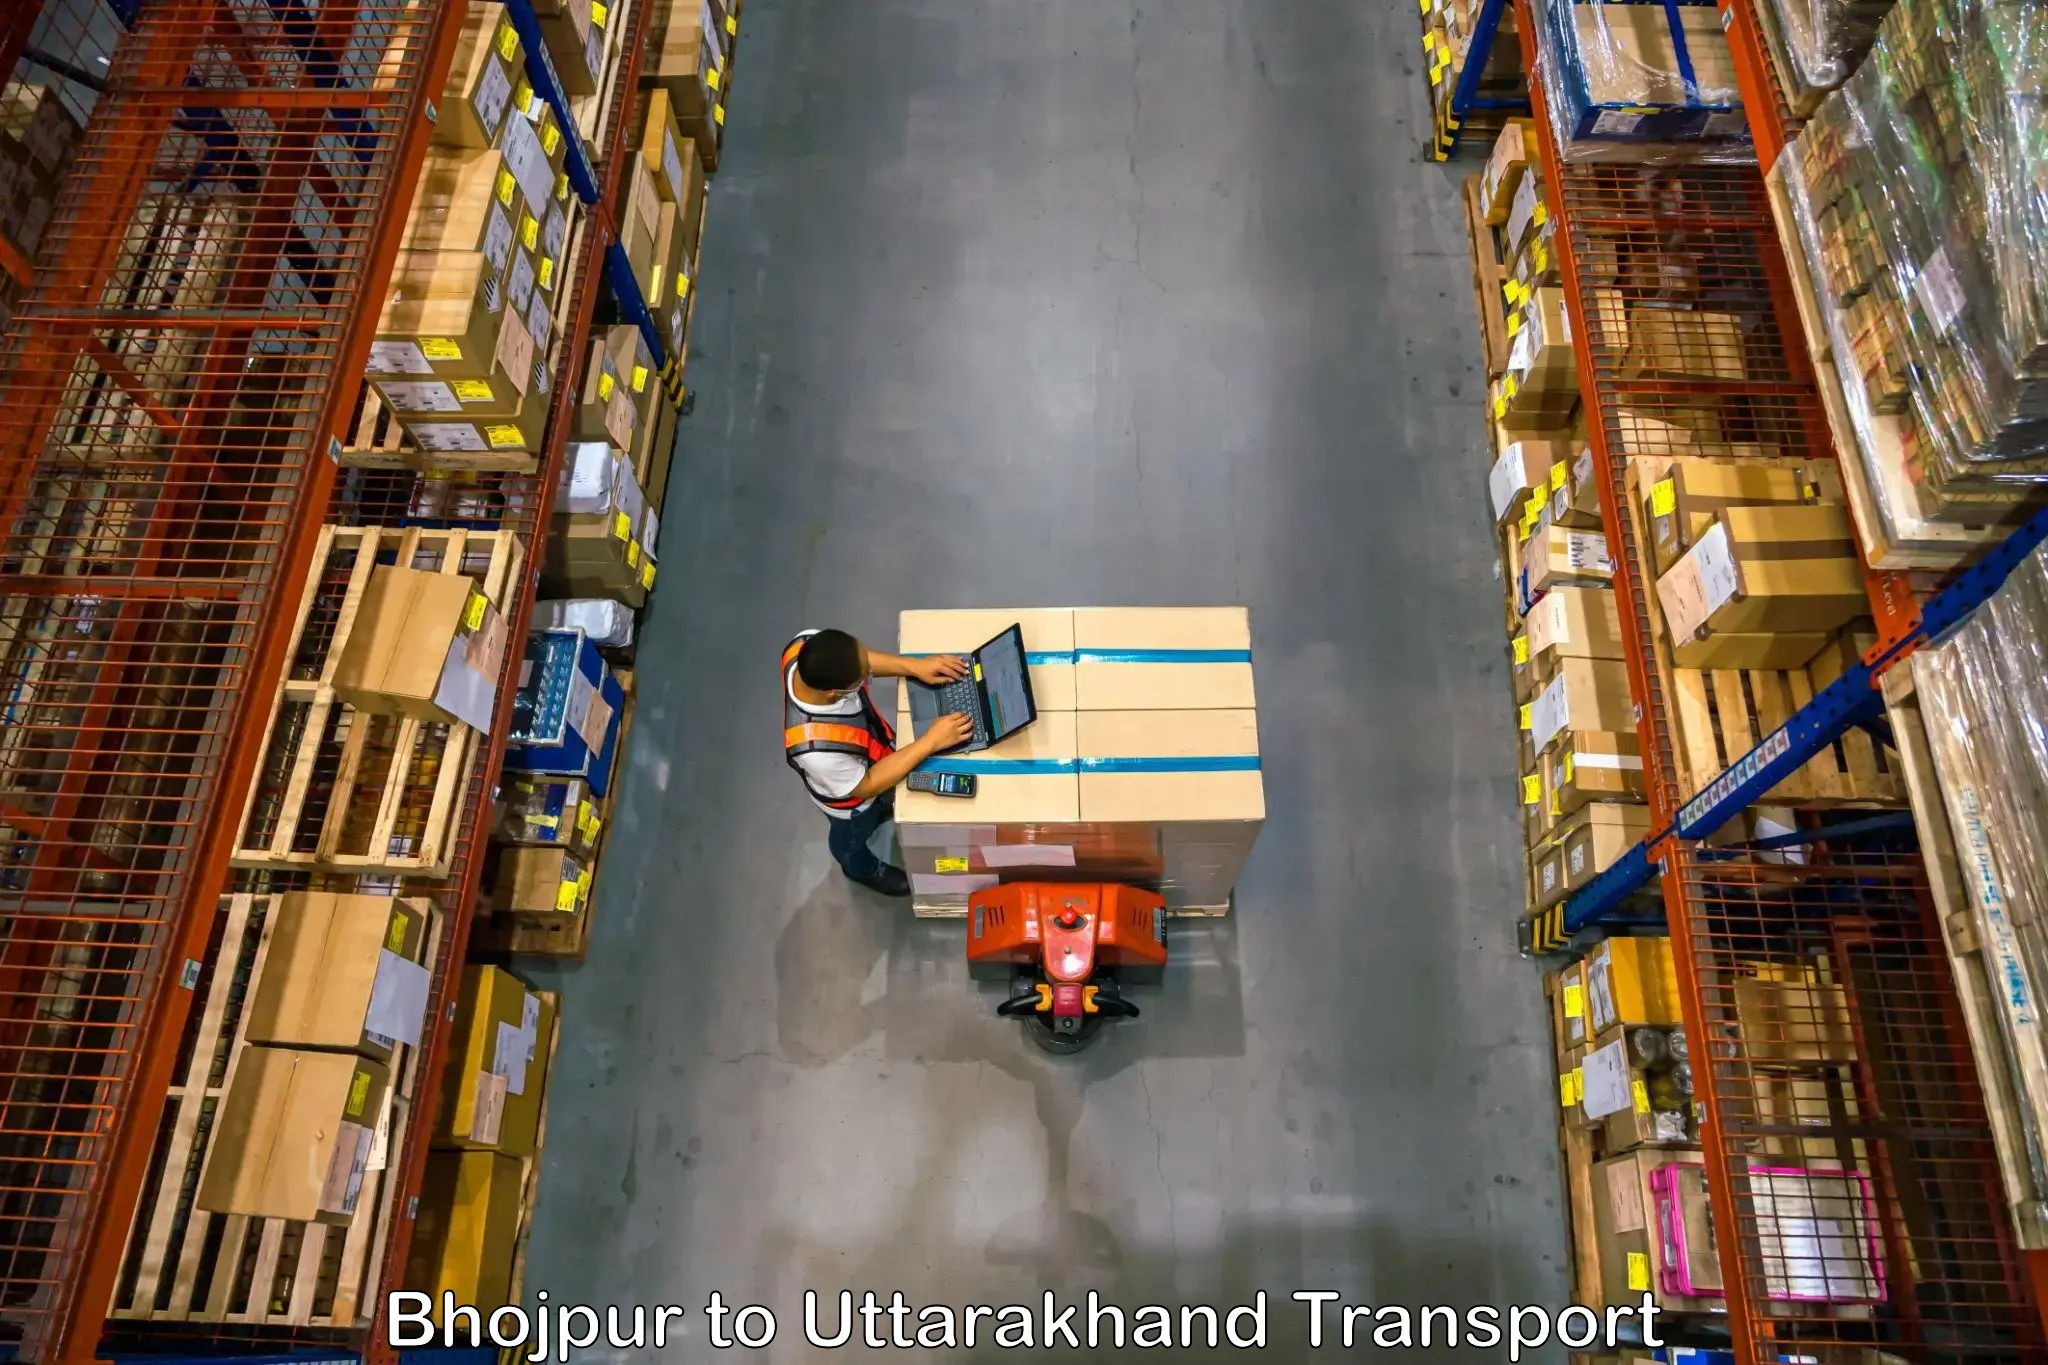 Truck transport companies in India Bhojpur to Almora